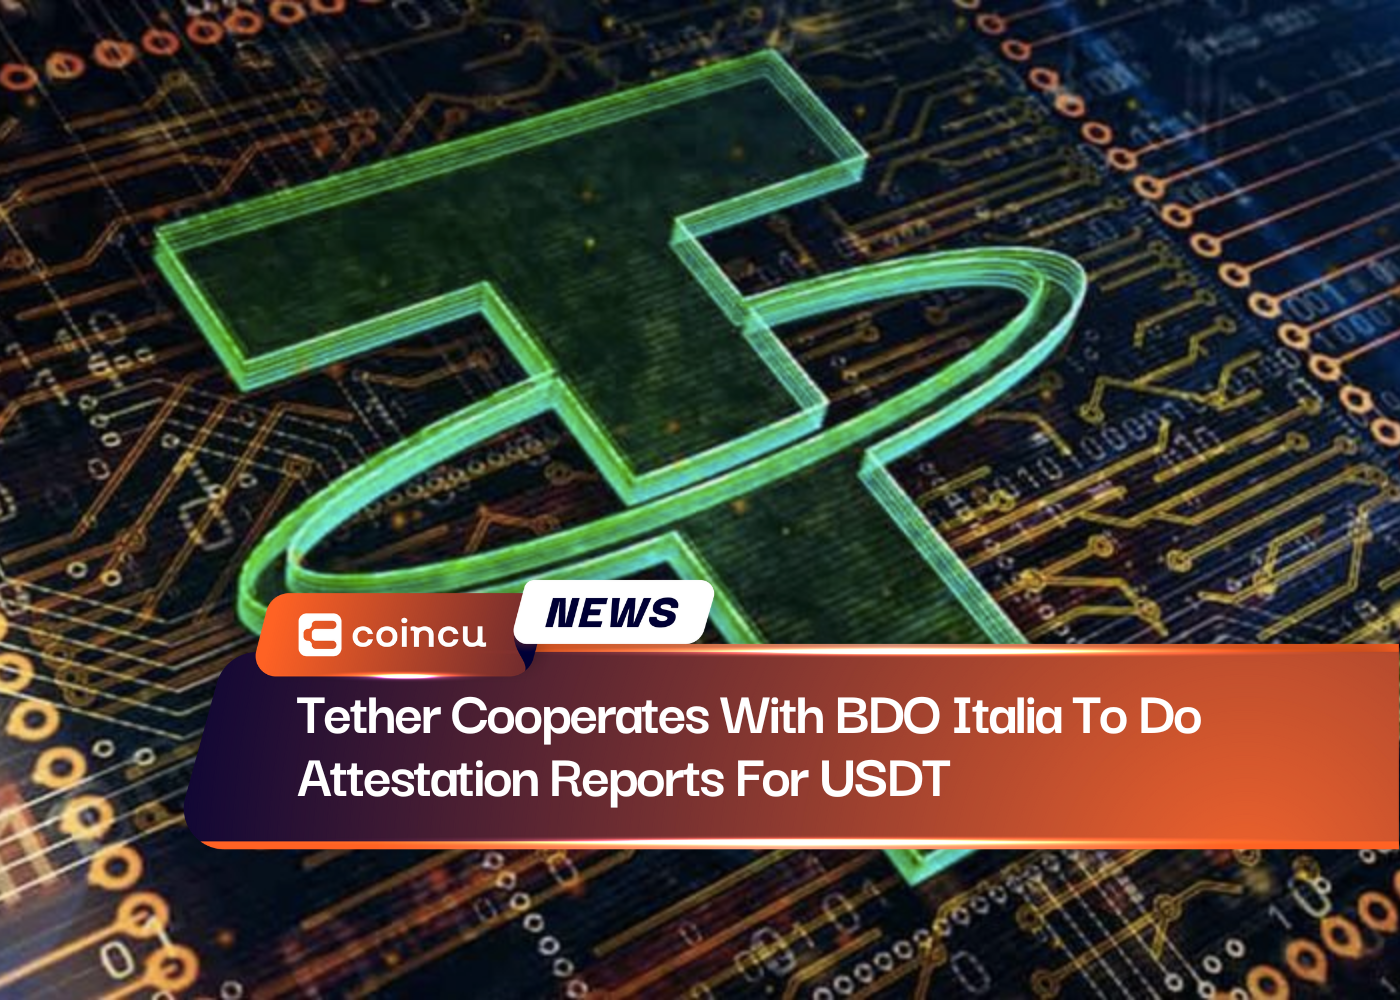 Tether Cooperates With BDO Italia To Do Attestation Reports For USDT